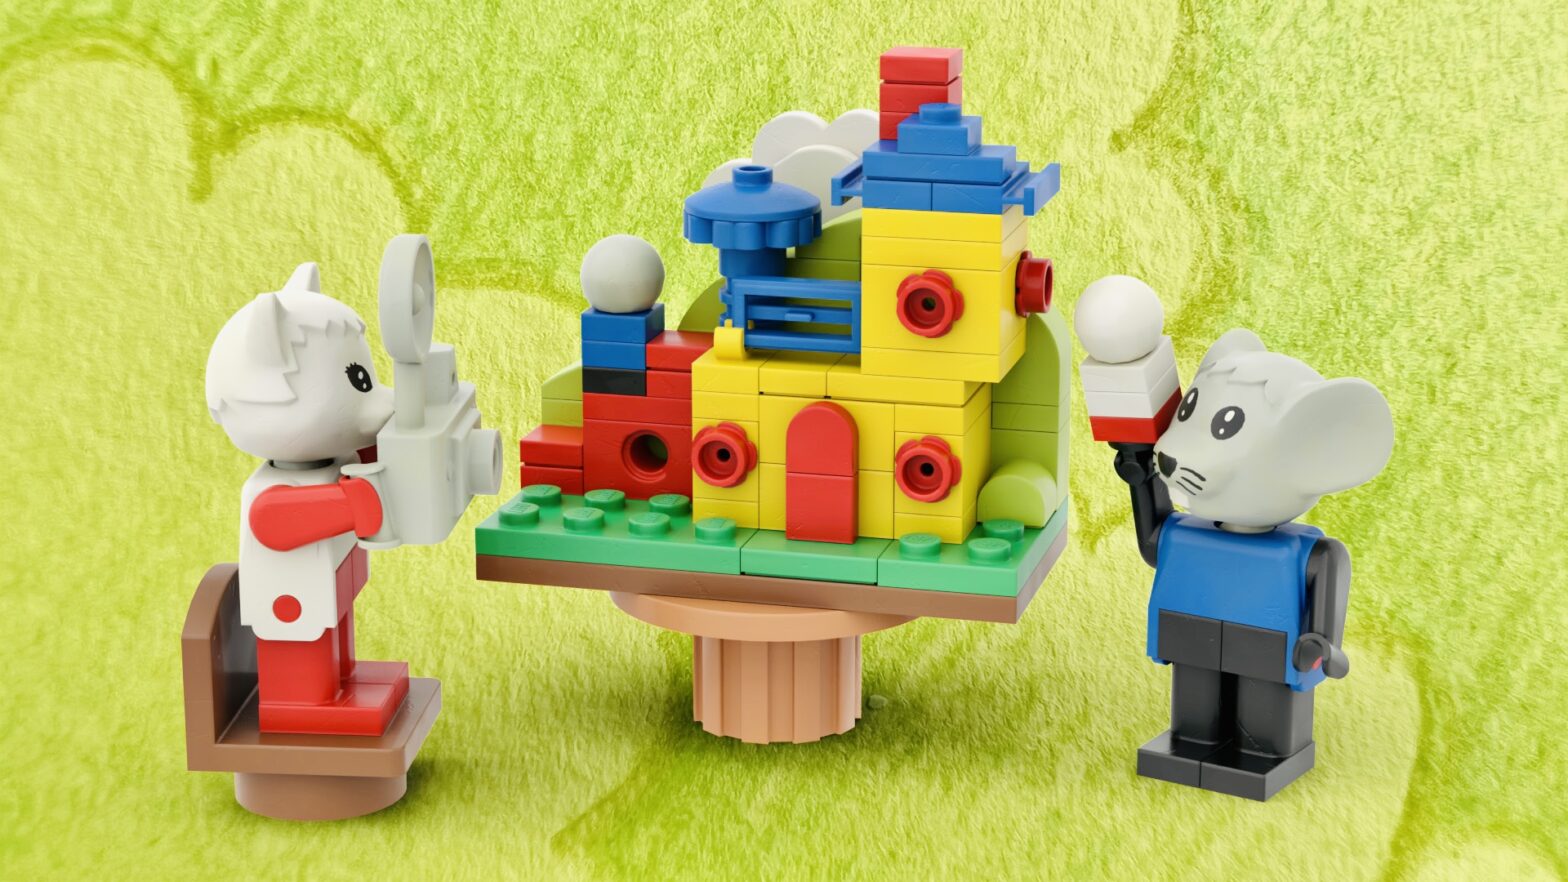 Cat minifigure pointing her camera at a microscale house. The mouse is holding a small brick-built version of his feline friend.